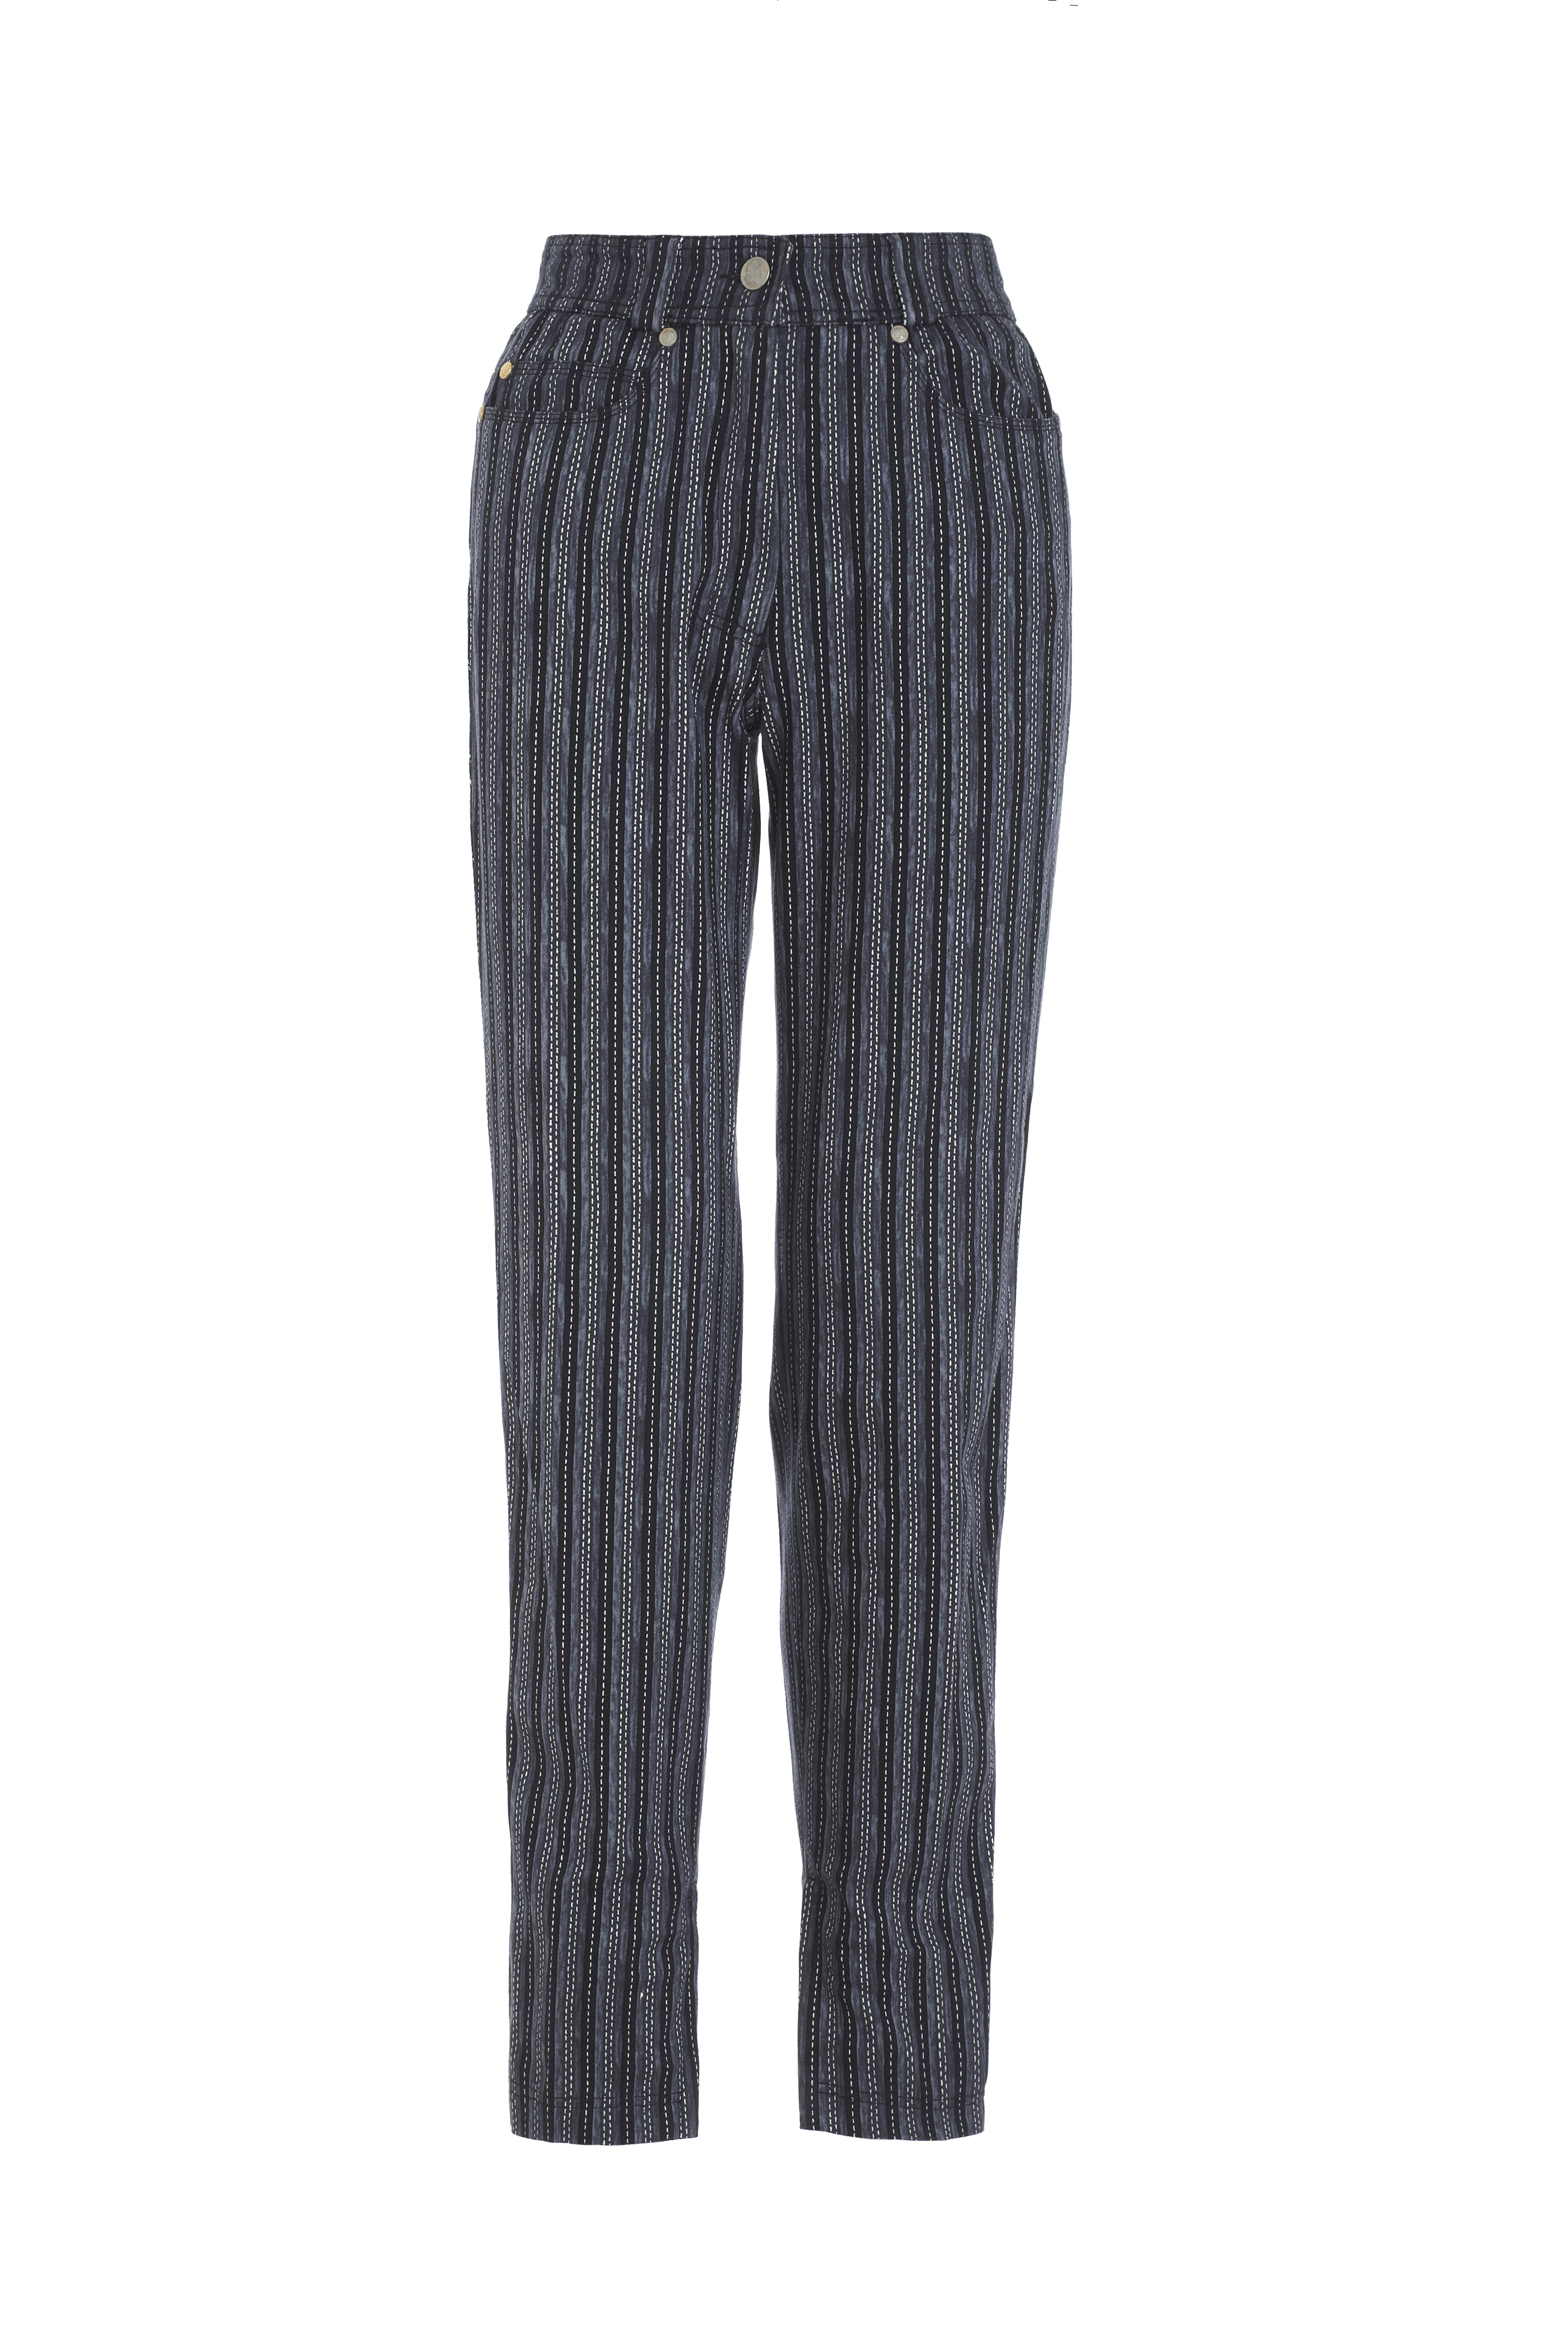 Gianni Versace Couture jeans.Blue,black & white pinstripes. | Curate8